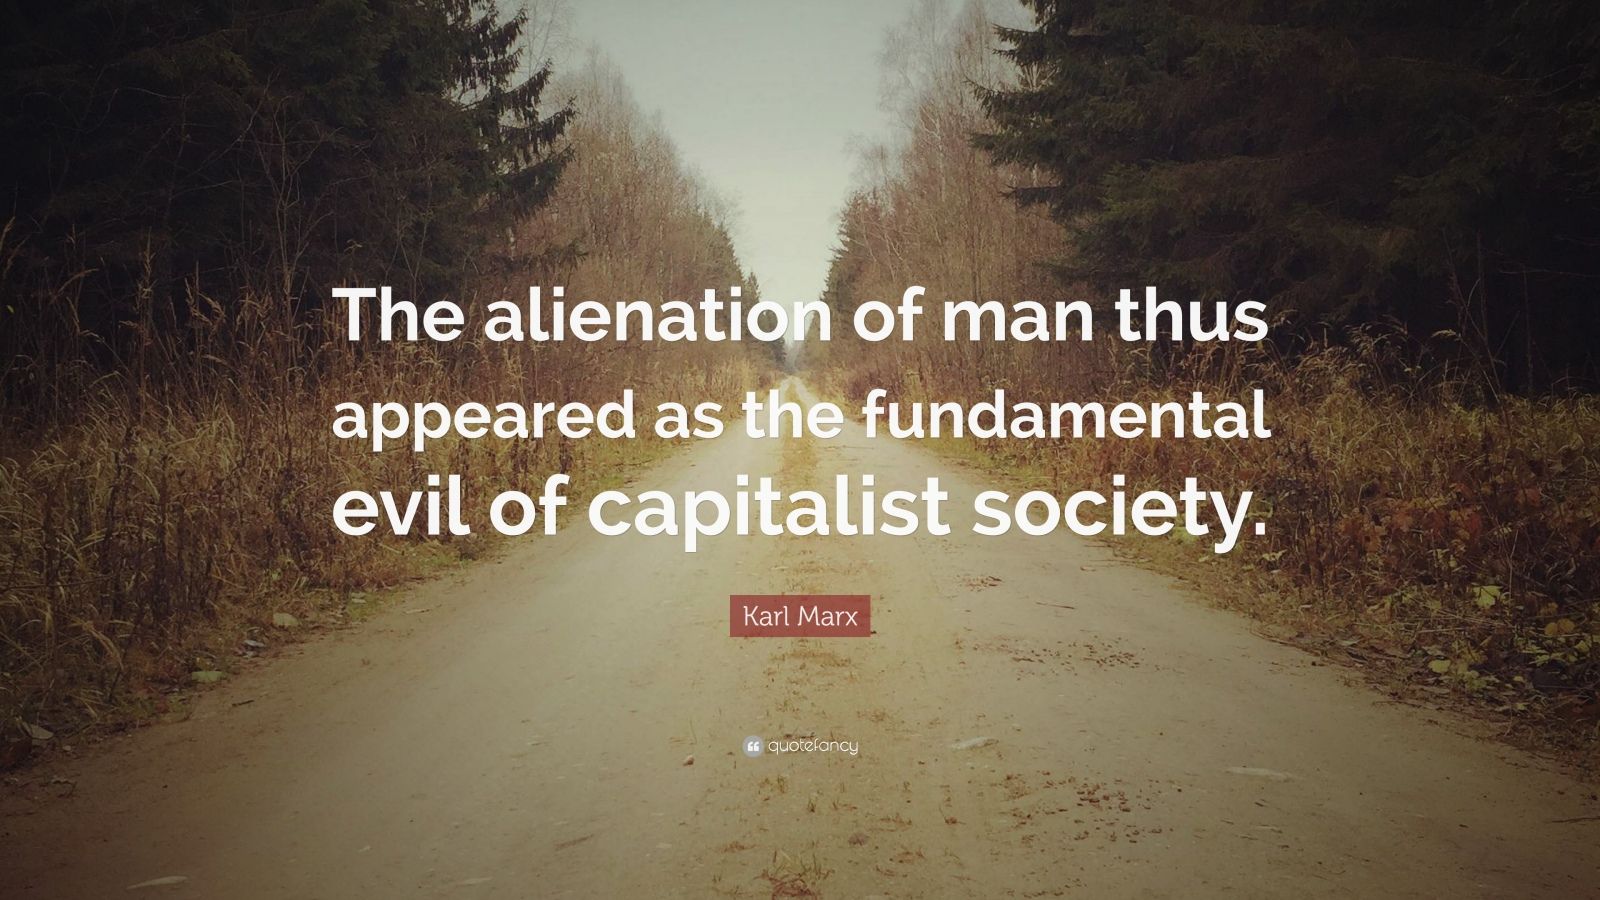 Karl Marx Quote: “The alienation of man thus appeared as the